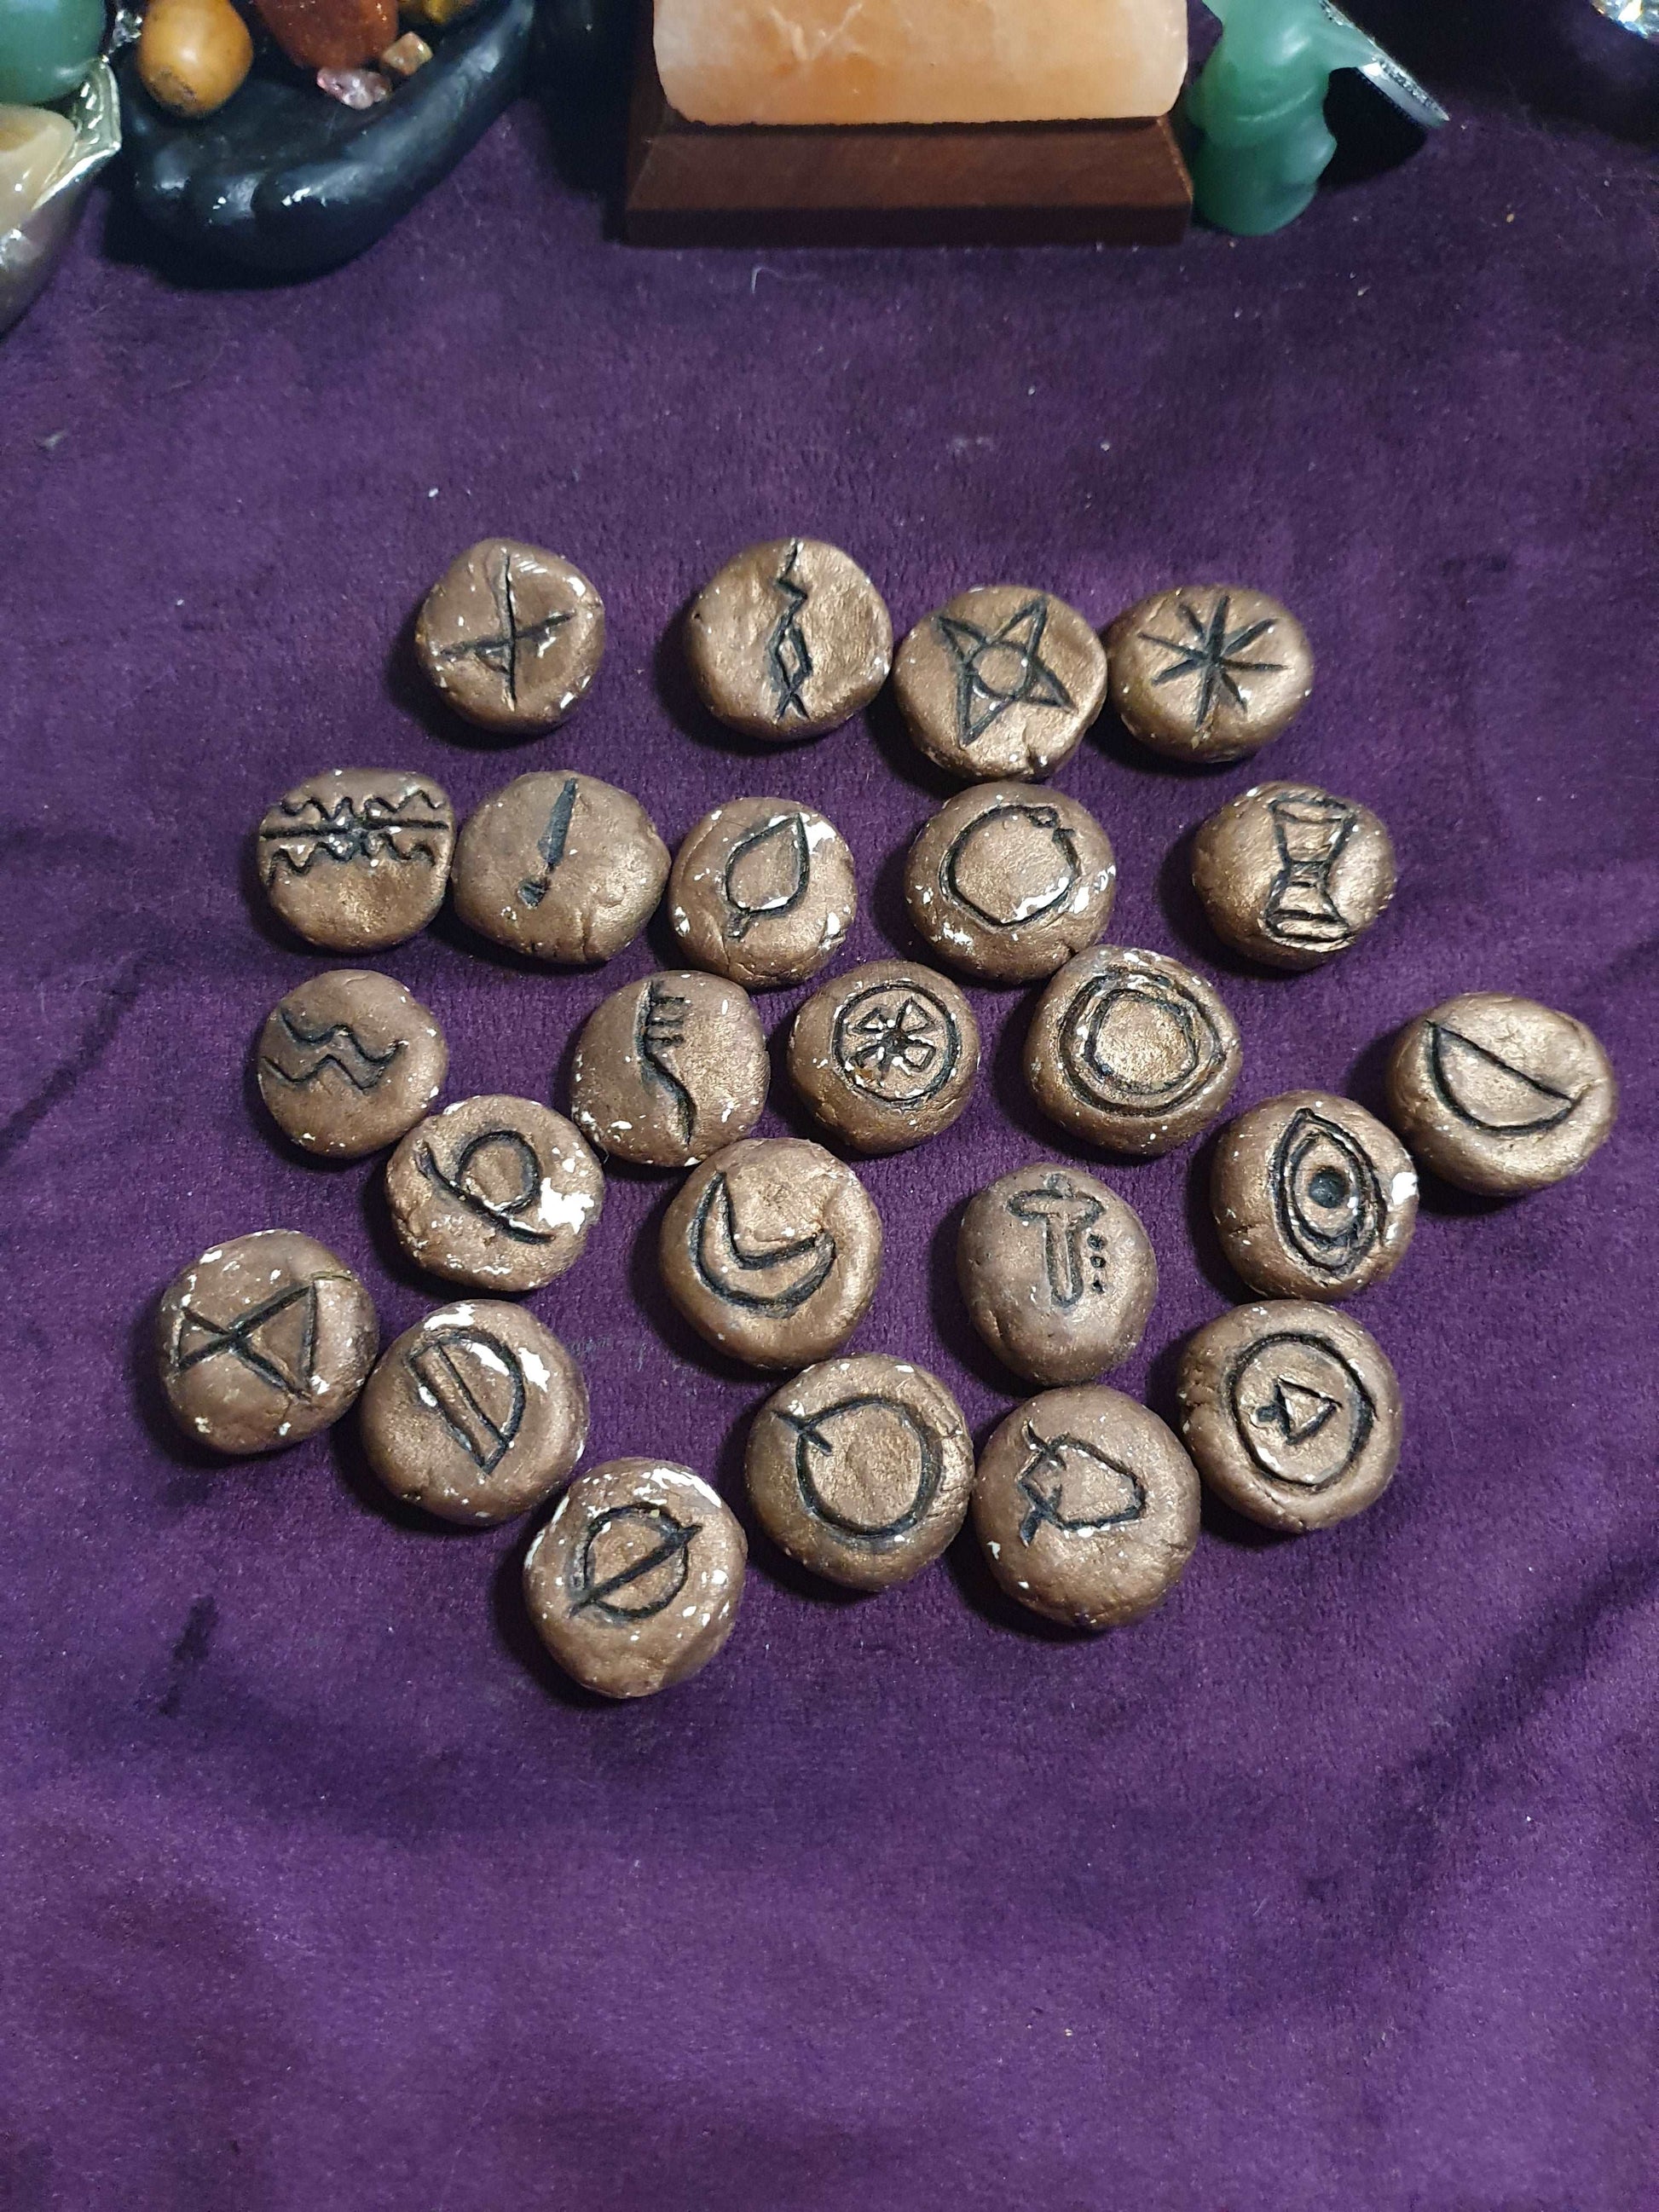 Learn to Read Babylonian Abundance Runes - Personal Online Lessons